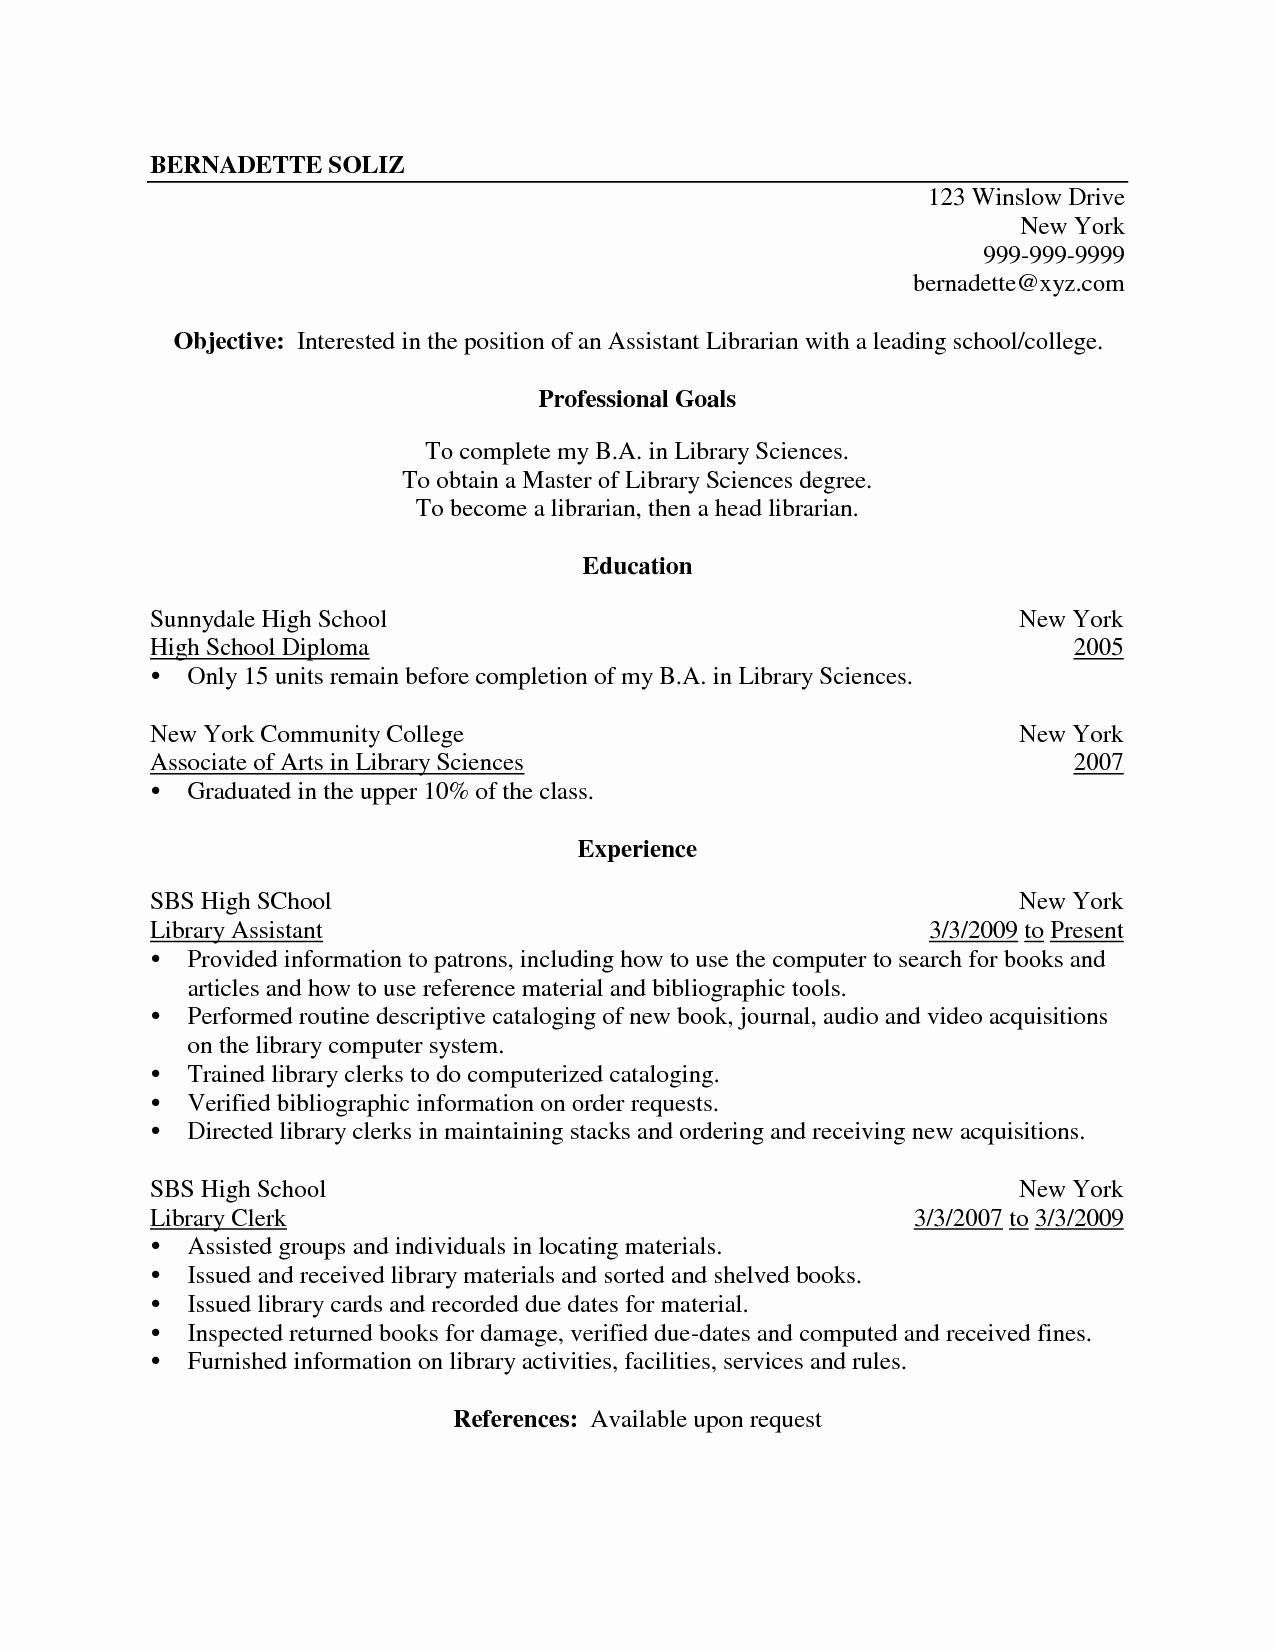 Sample Resume Objective for Library assistant